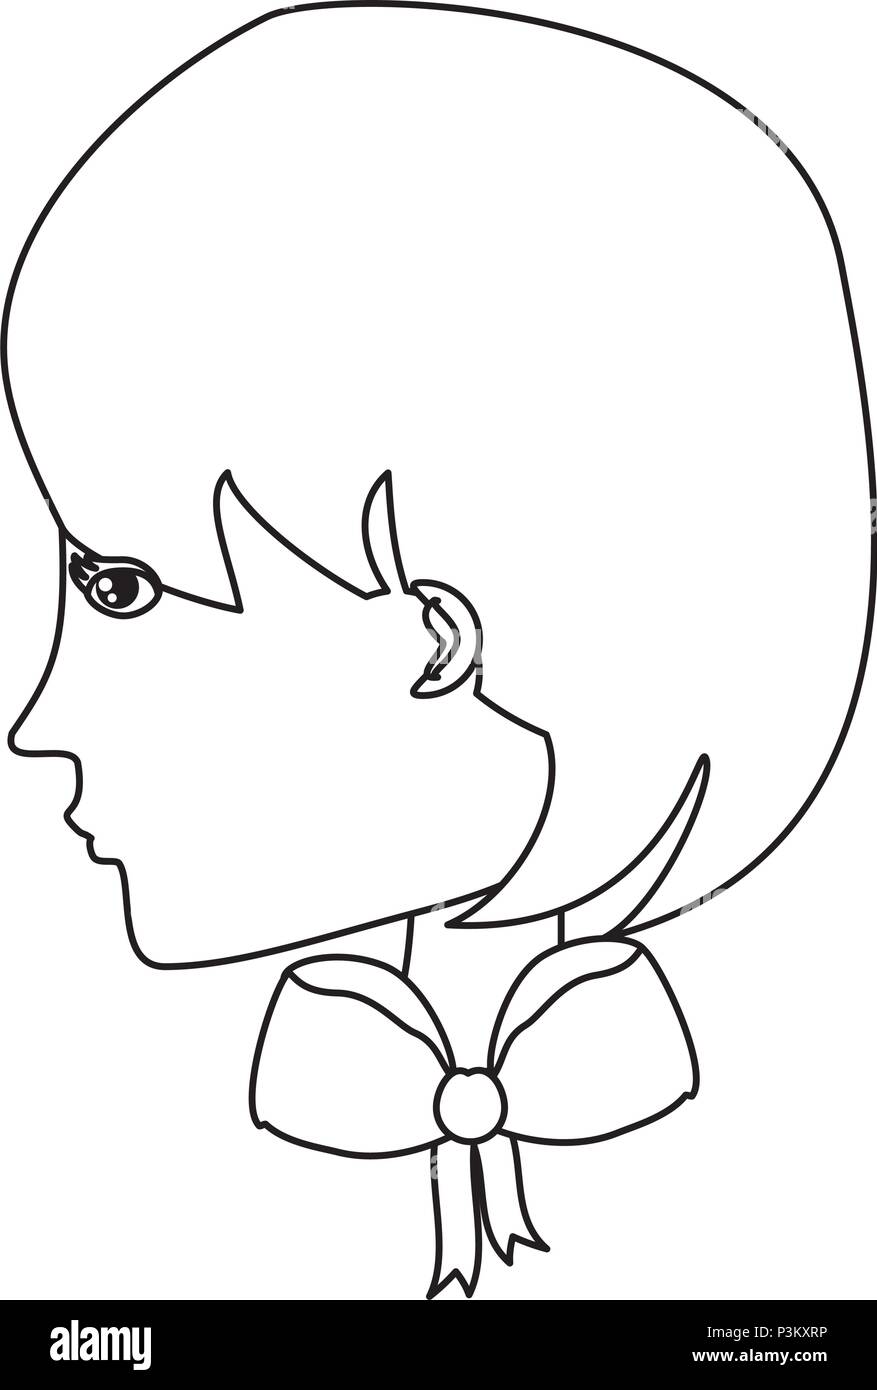 Vectoring Short Hair in a Negative Space Illustration in Adobe